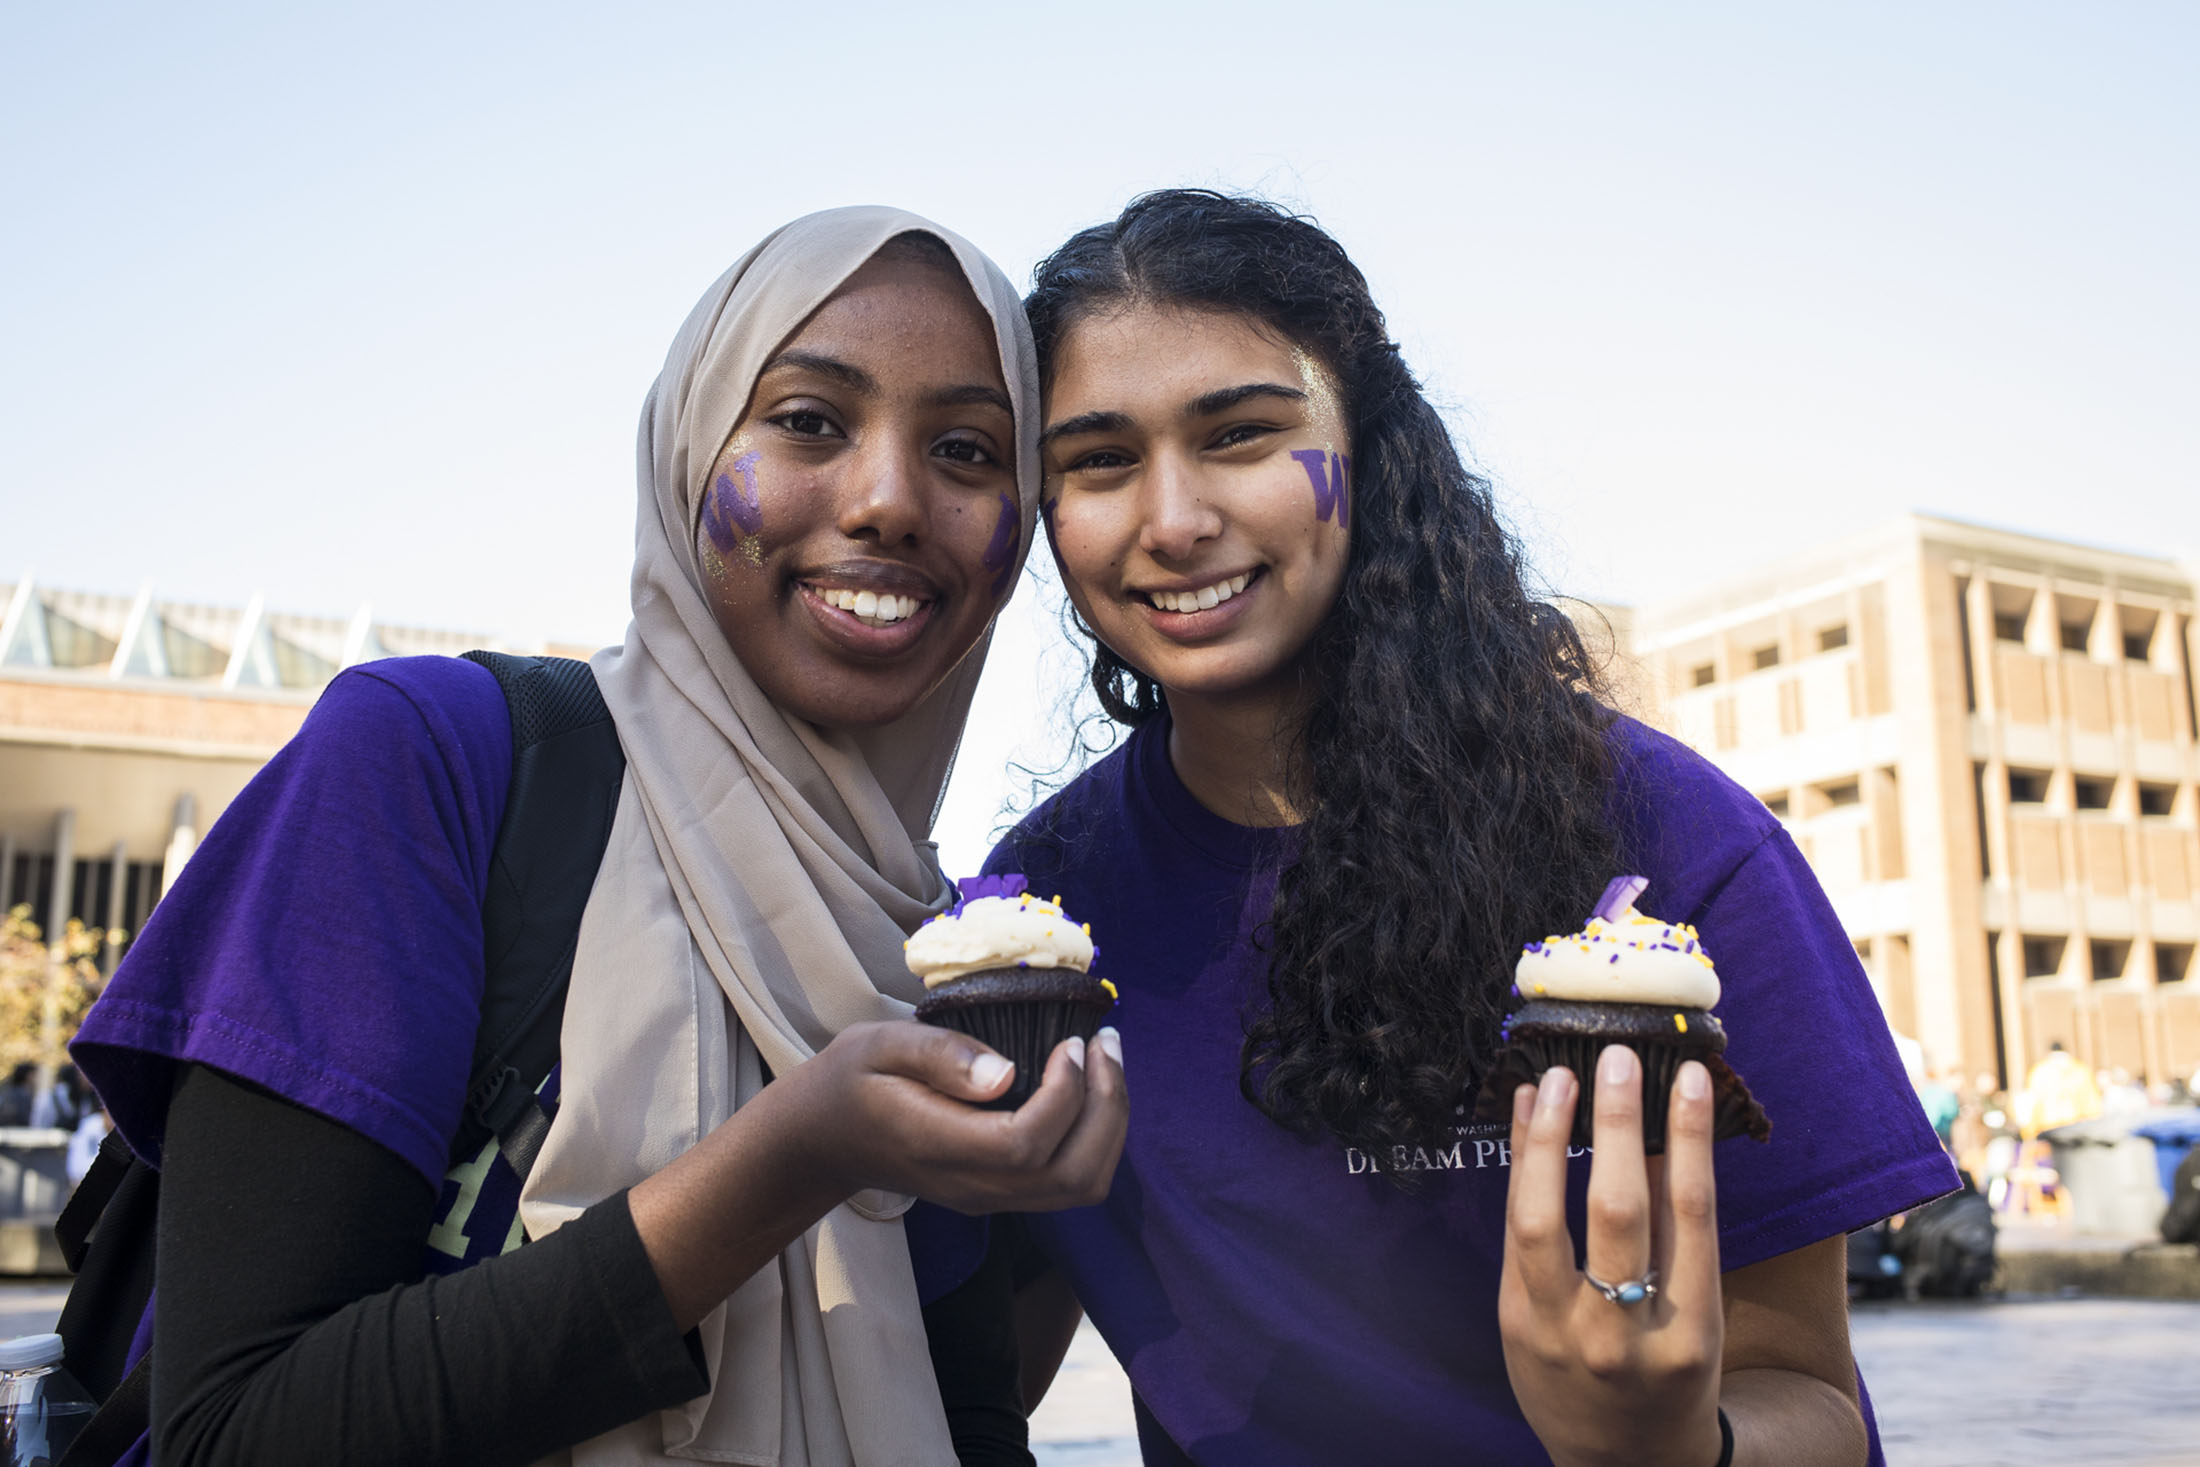 W DAY, Celebrate the UW's birthday with music, games, giveaways and other treats on Red Square!